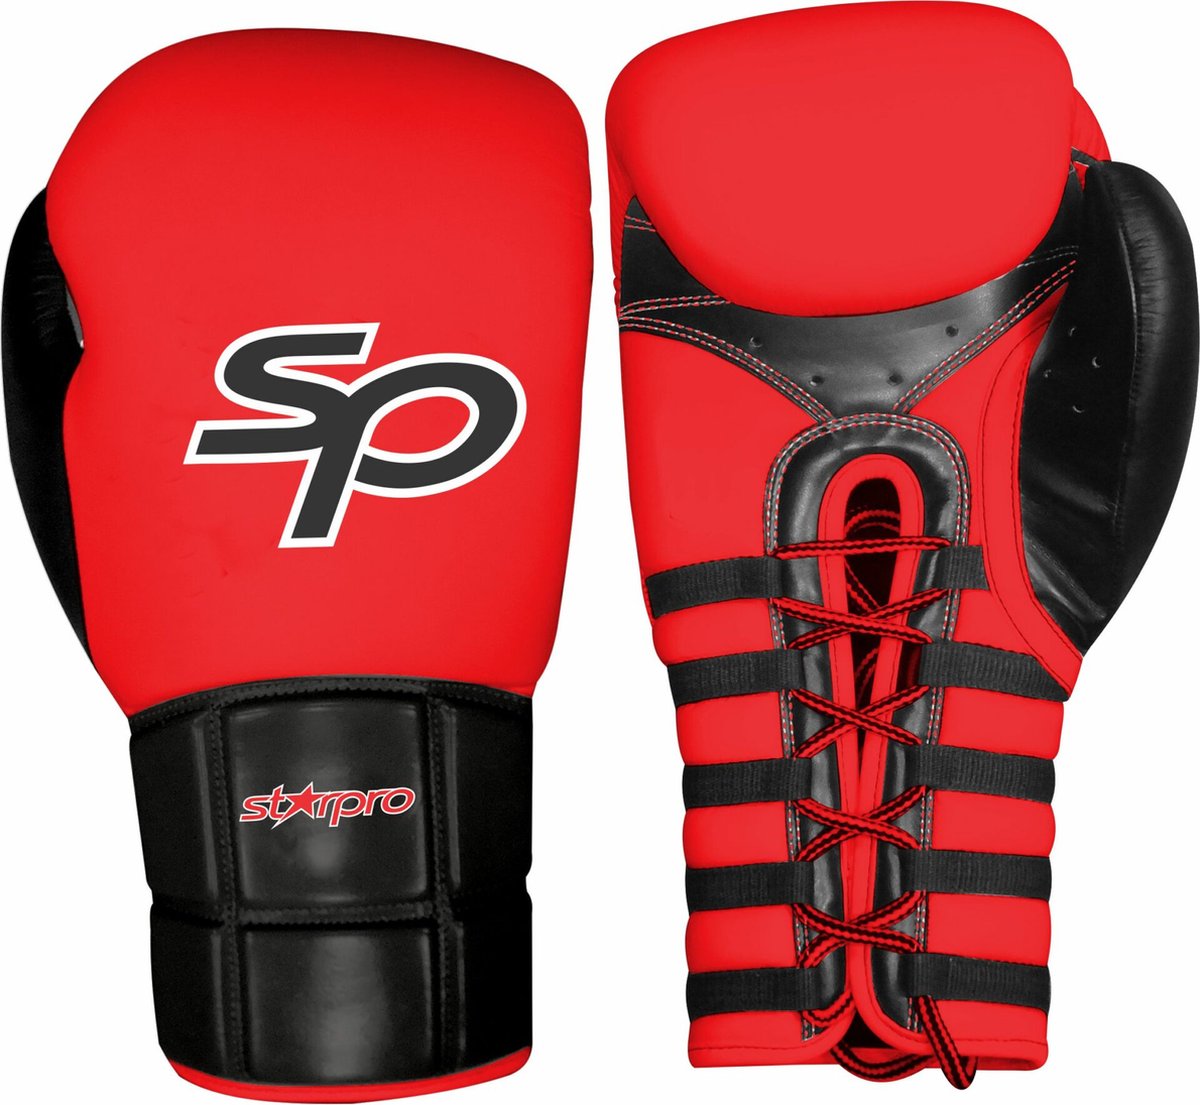 Safety Sparring Boxing Glove Layered Foam | Rood / Zwart (Maat: 16OZ)